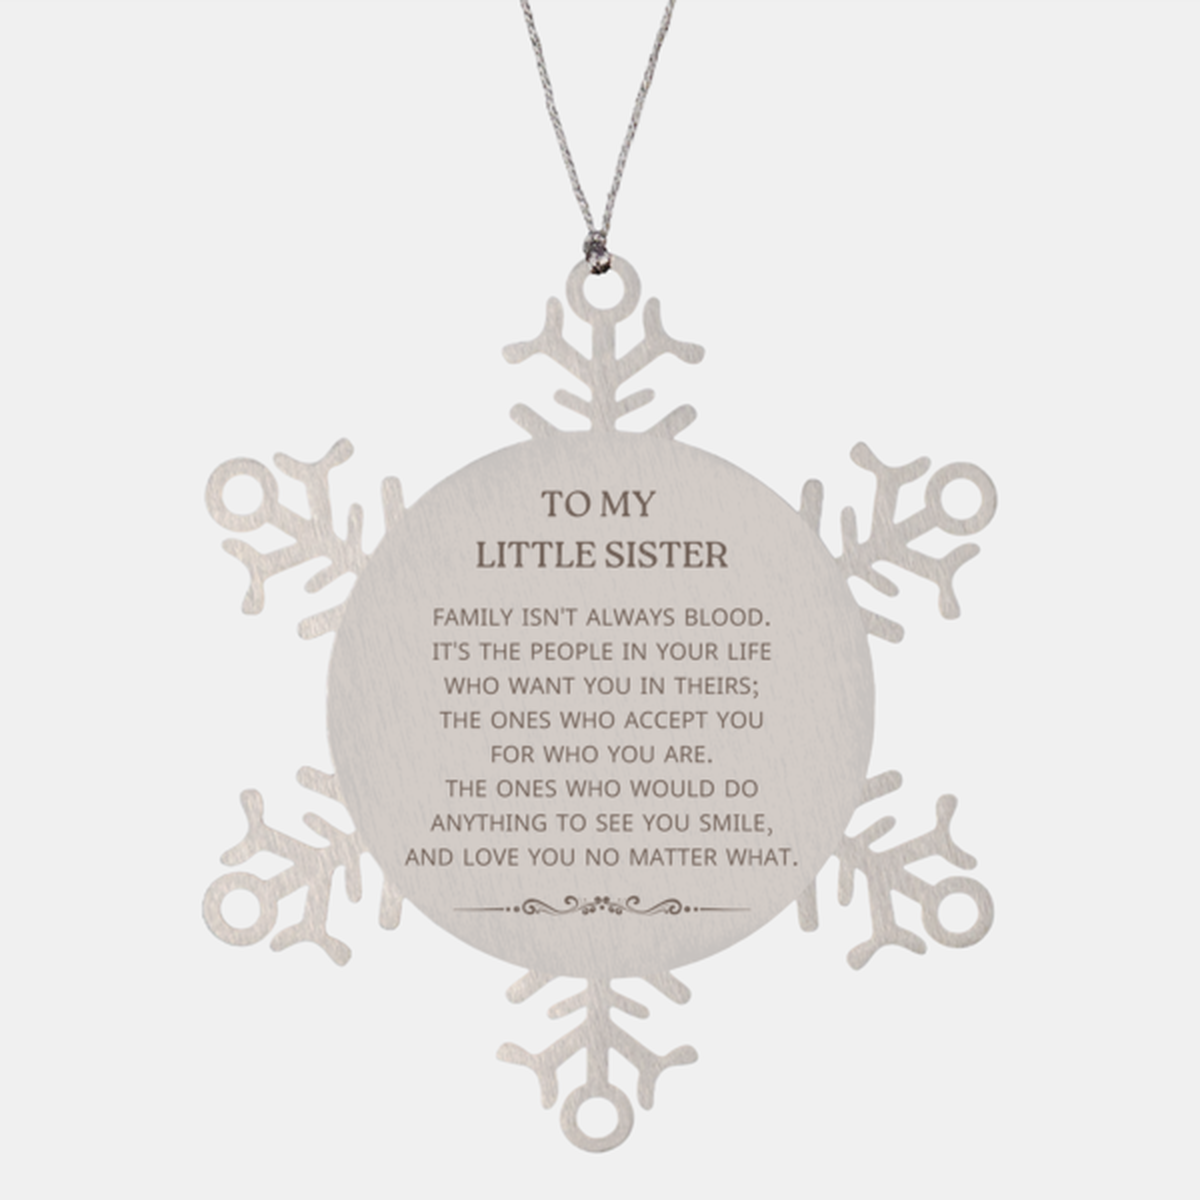 To My Little Sister Gifts, Family isn't always blood, Little Sister Snowflake Ornament, Birthday Christmas Unique Present For Little Sister